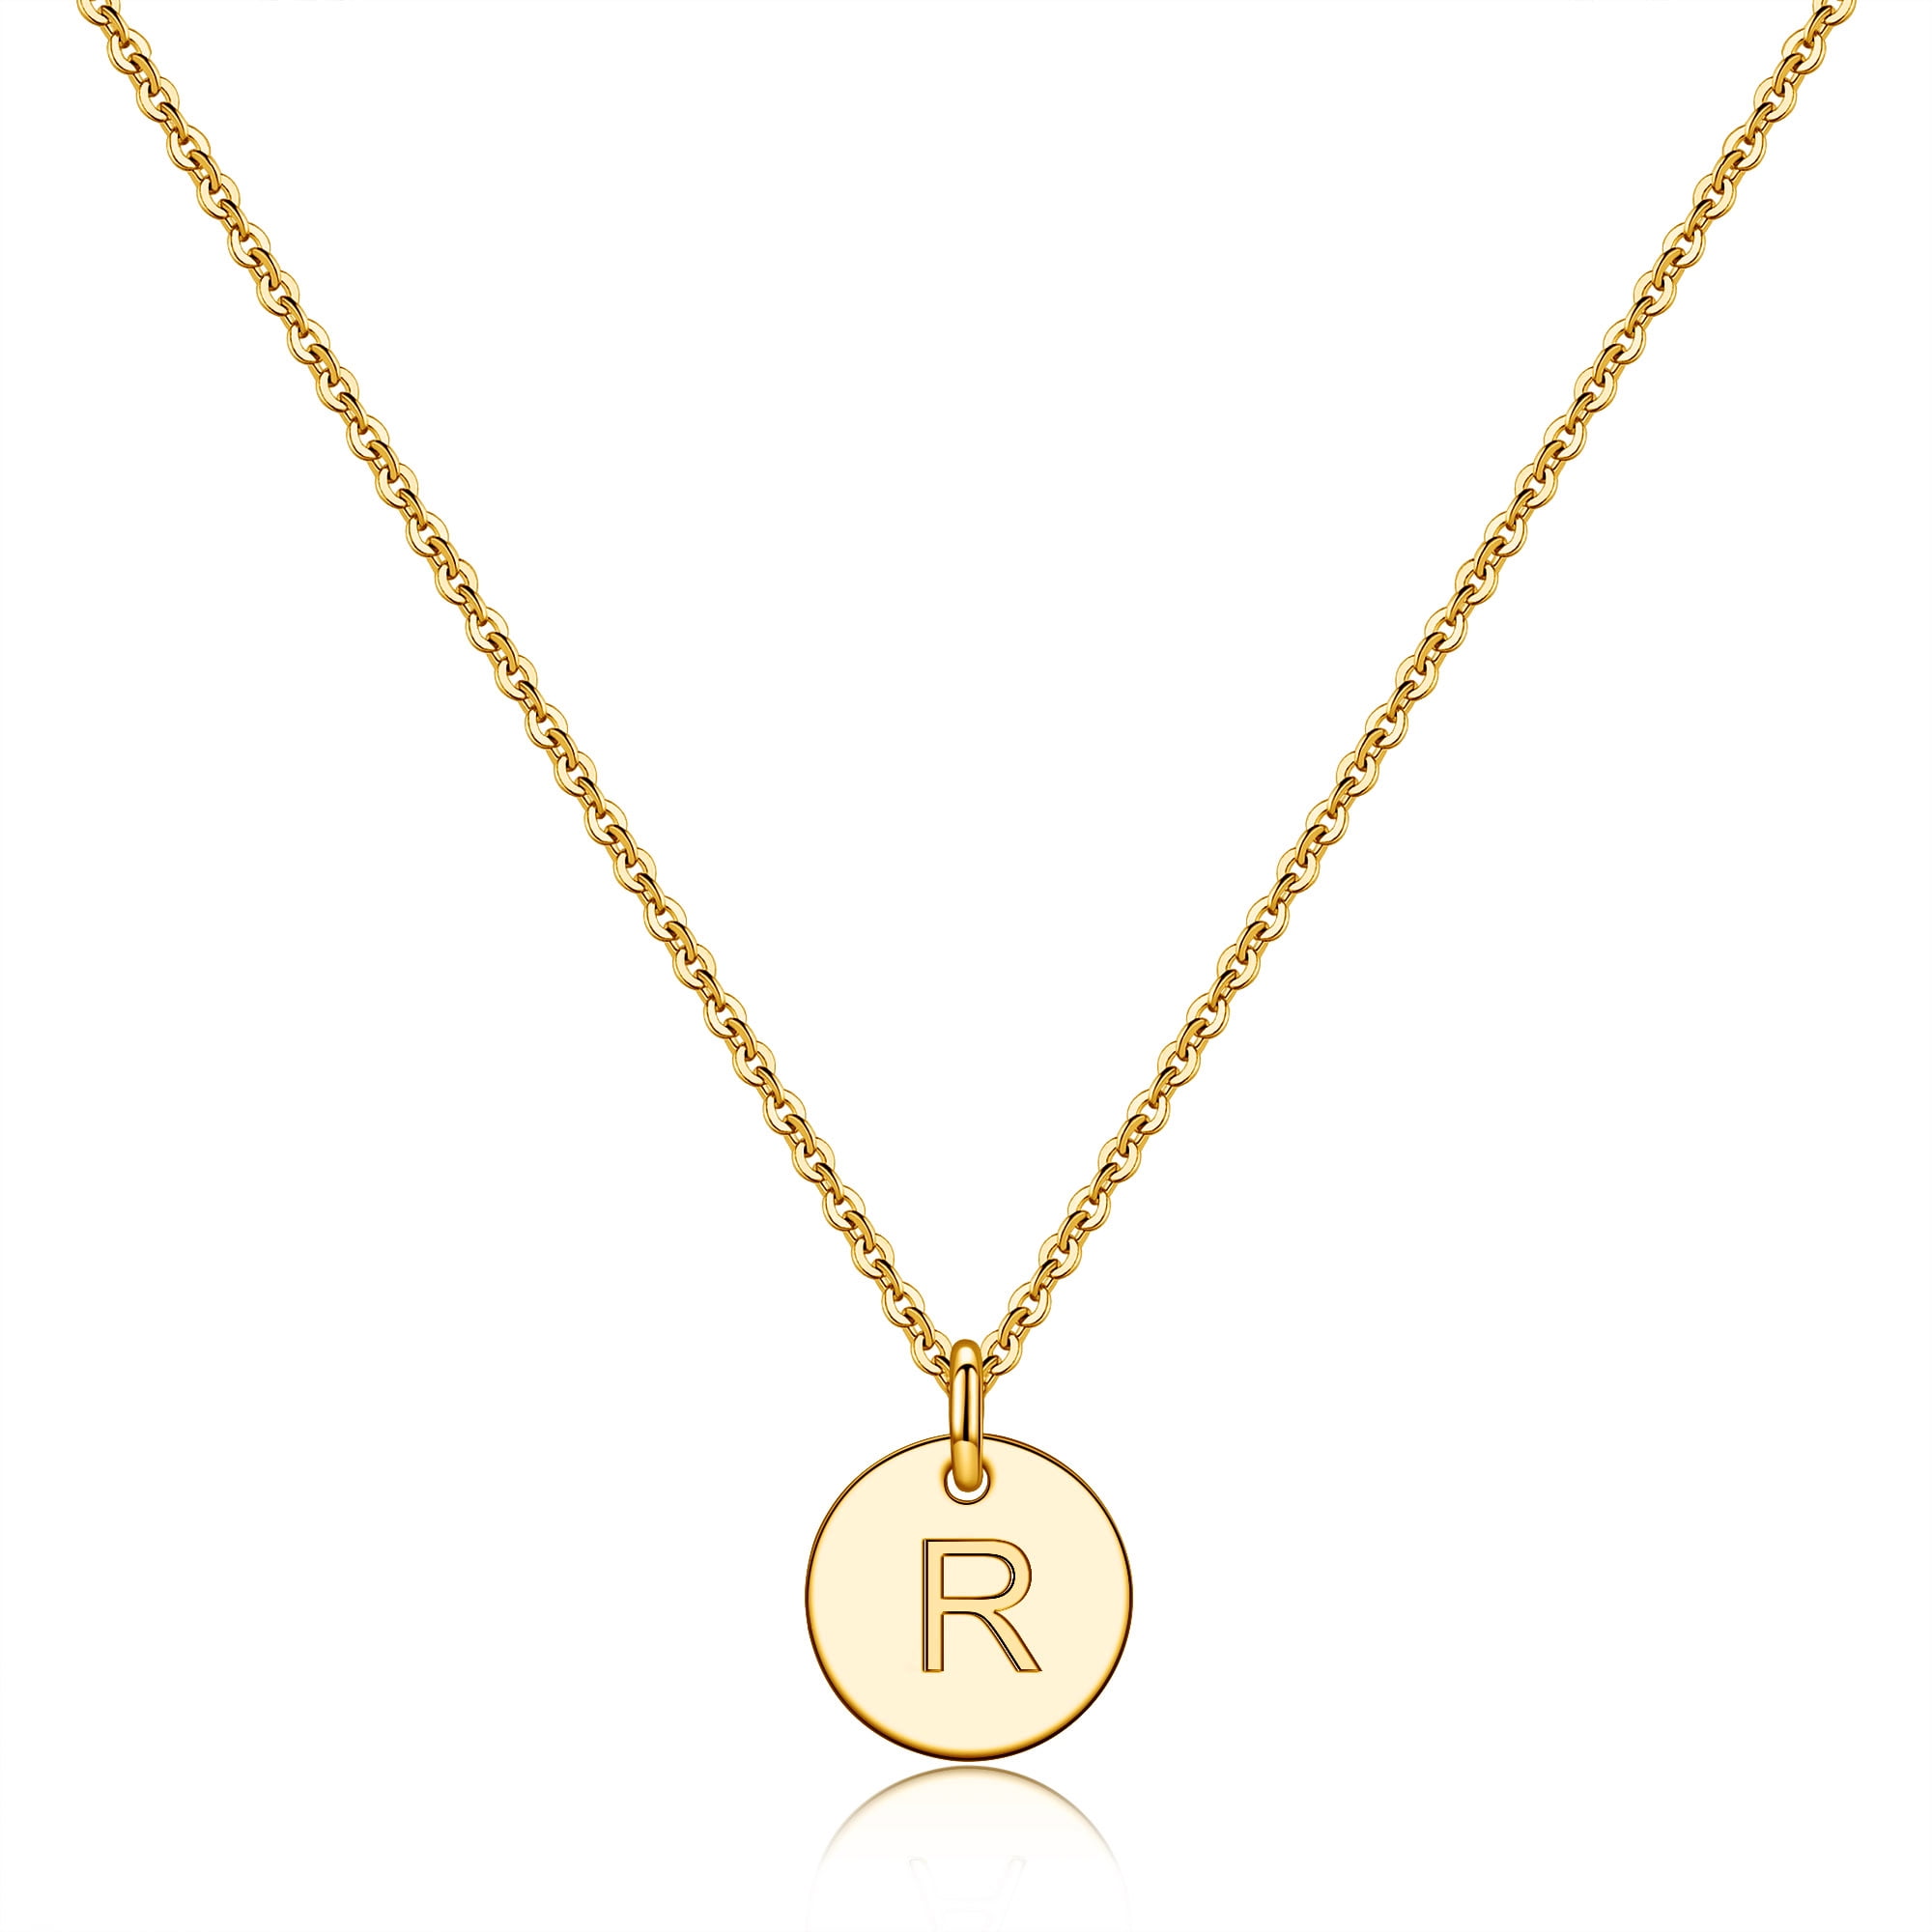 Name Necklace-Tiny Gold Name Necklace-Personalized Necklace-Personalized Jewelry-Personalized Gift-Letter Necklace-Initial Necklace-Jewelry